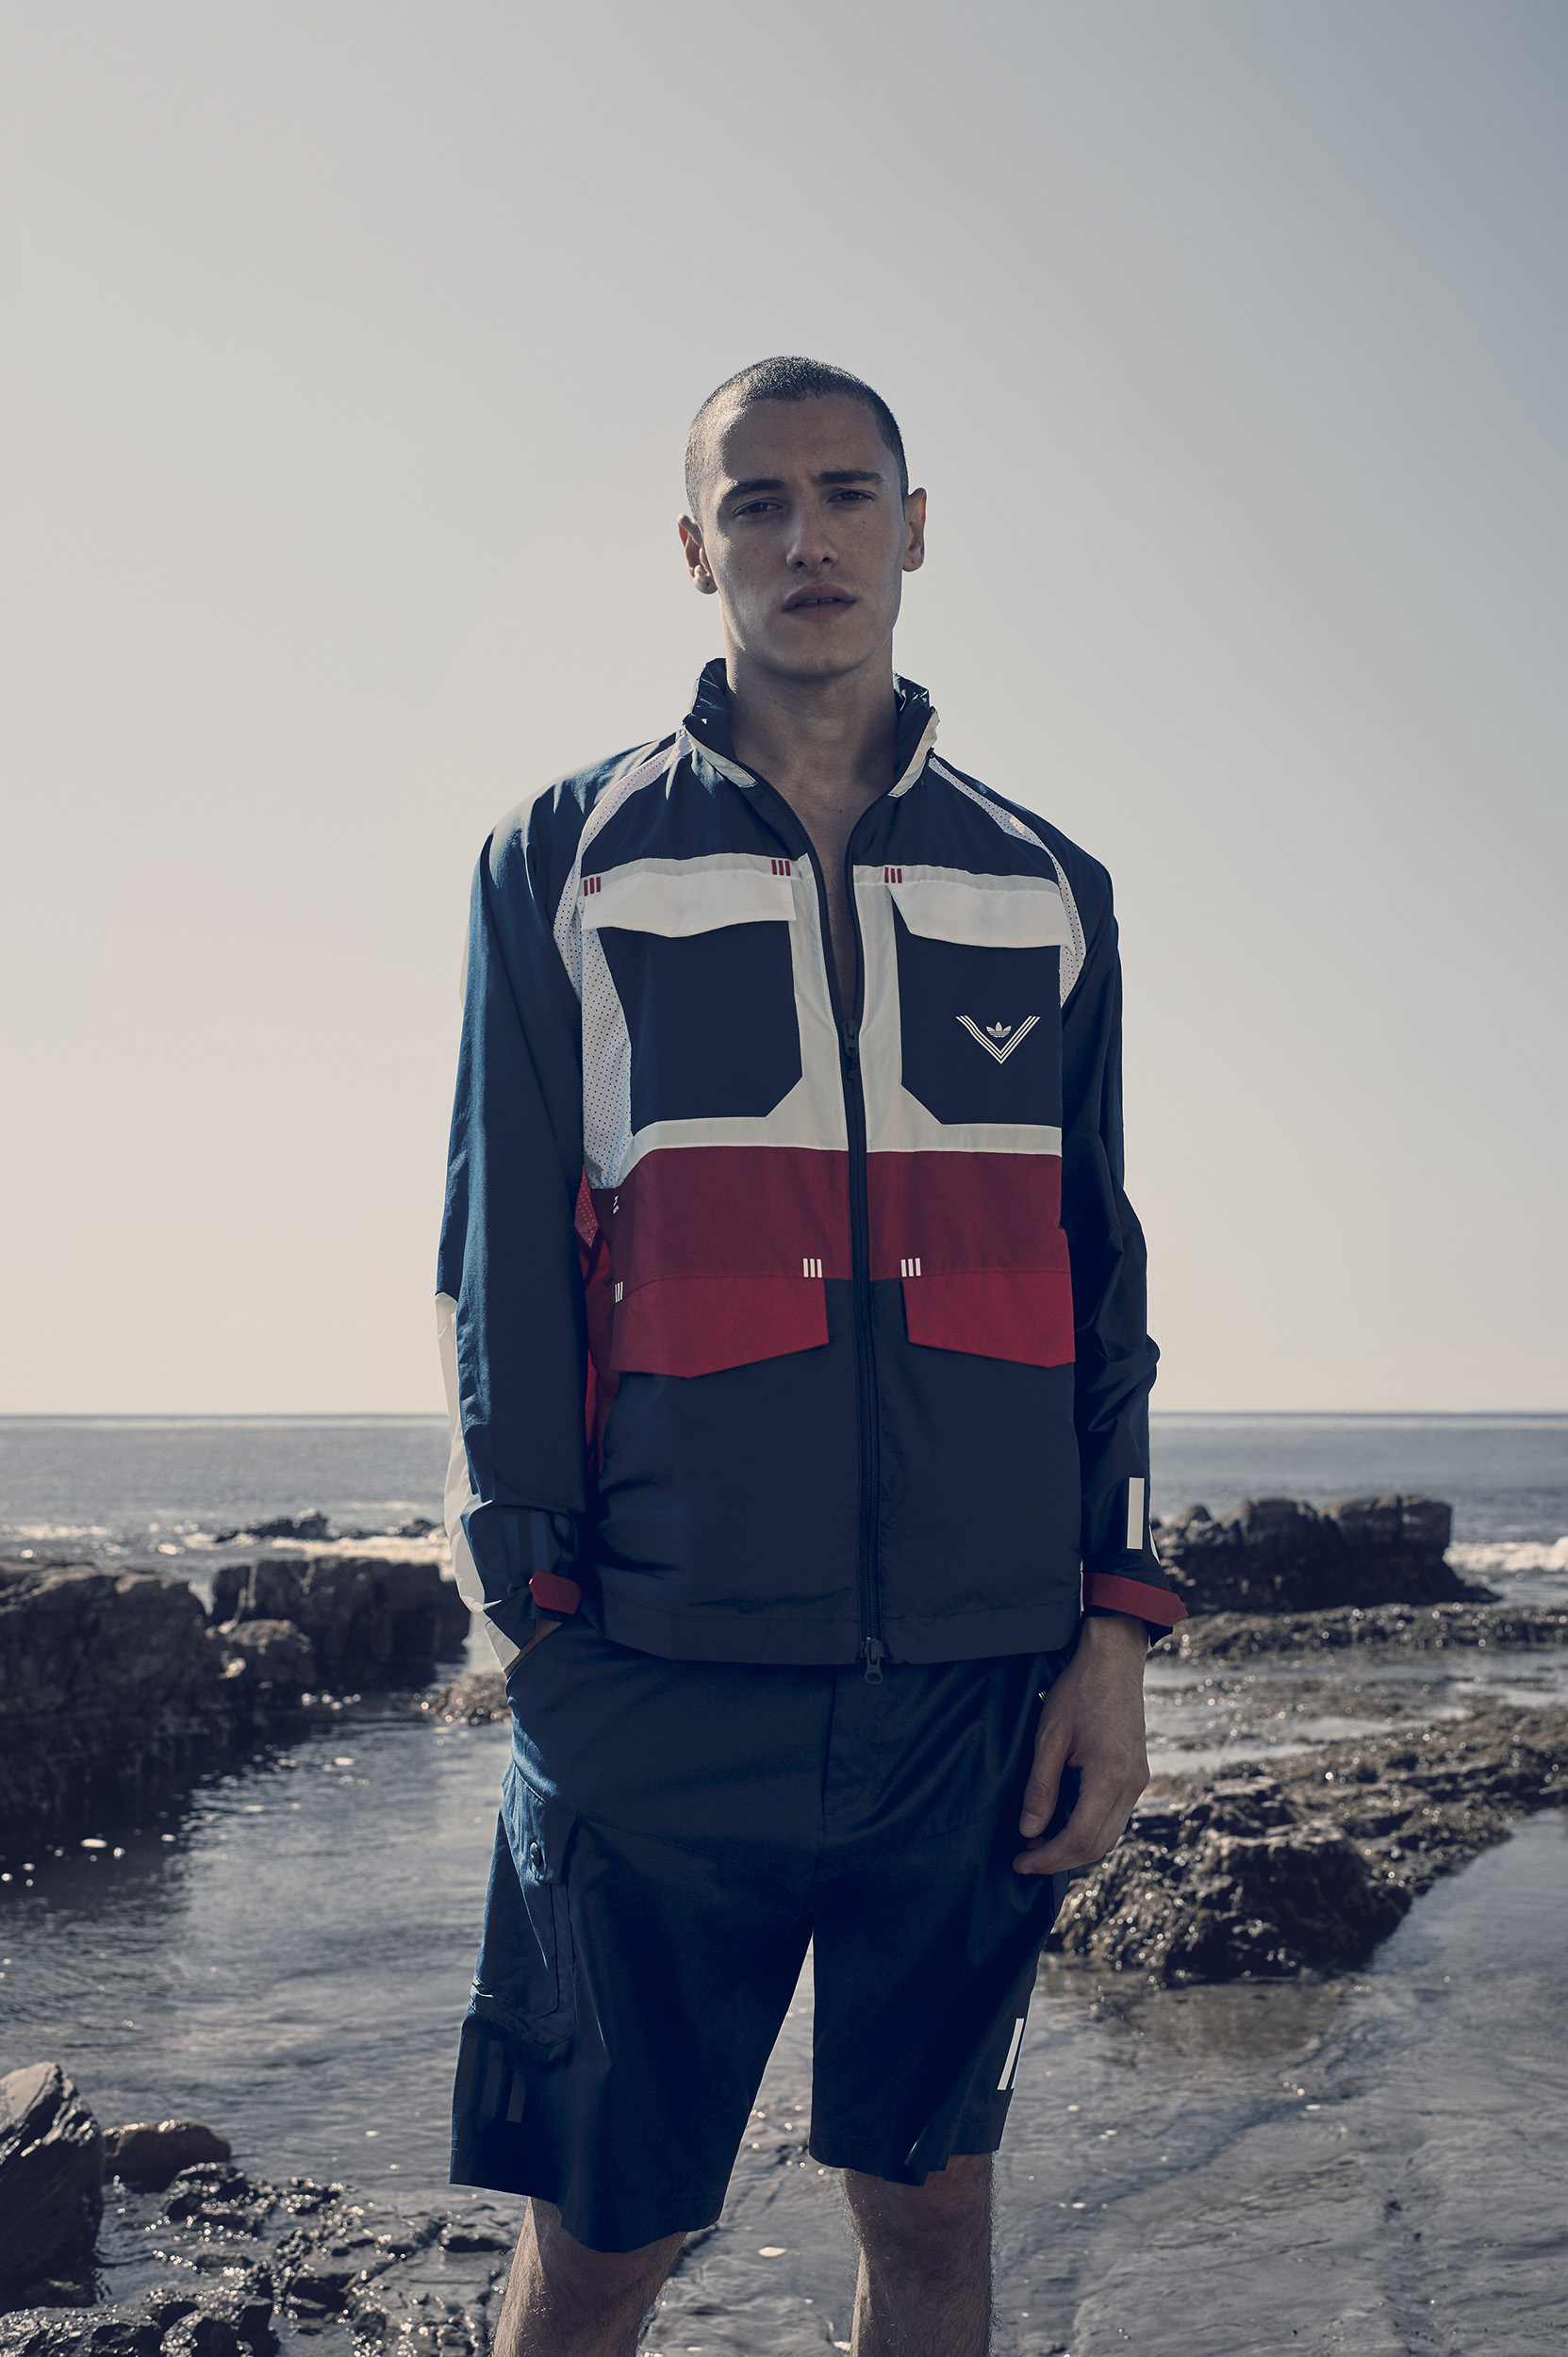 ADIDAS ORIGINALS BY WHITE MOUNTAINEERING: THE INNOVATIVE